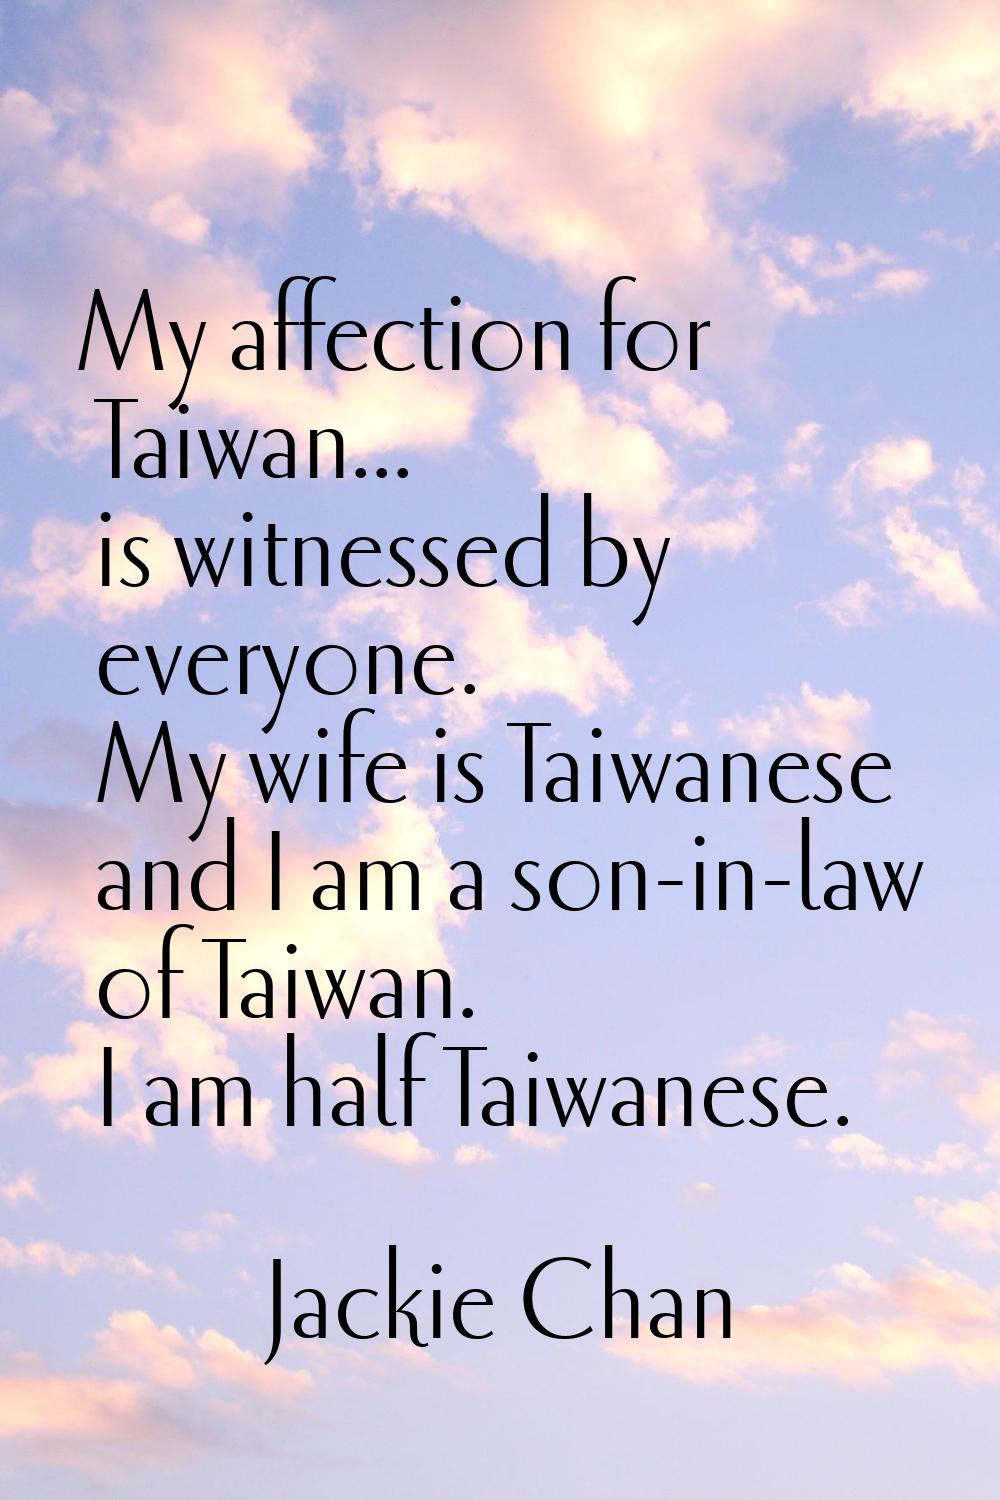 My affection for Taiwan... is witnessed by everyone. My wife is Taiwanese and I am a son-in-law of 